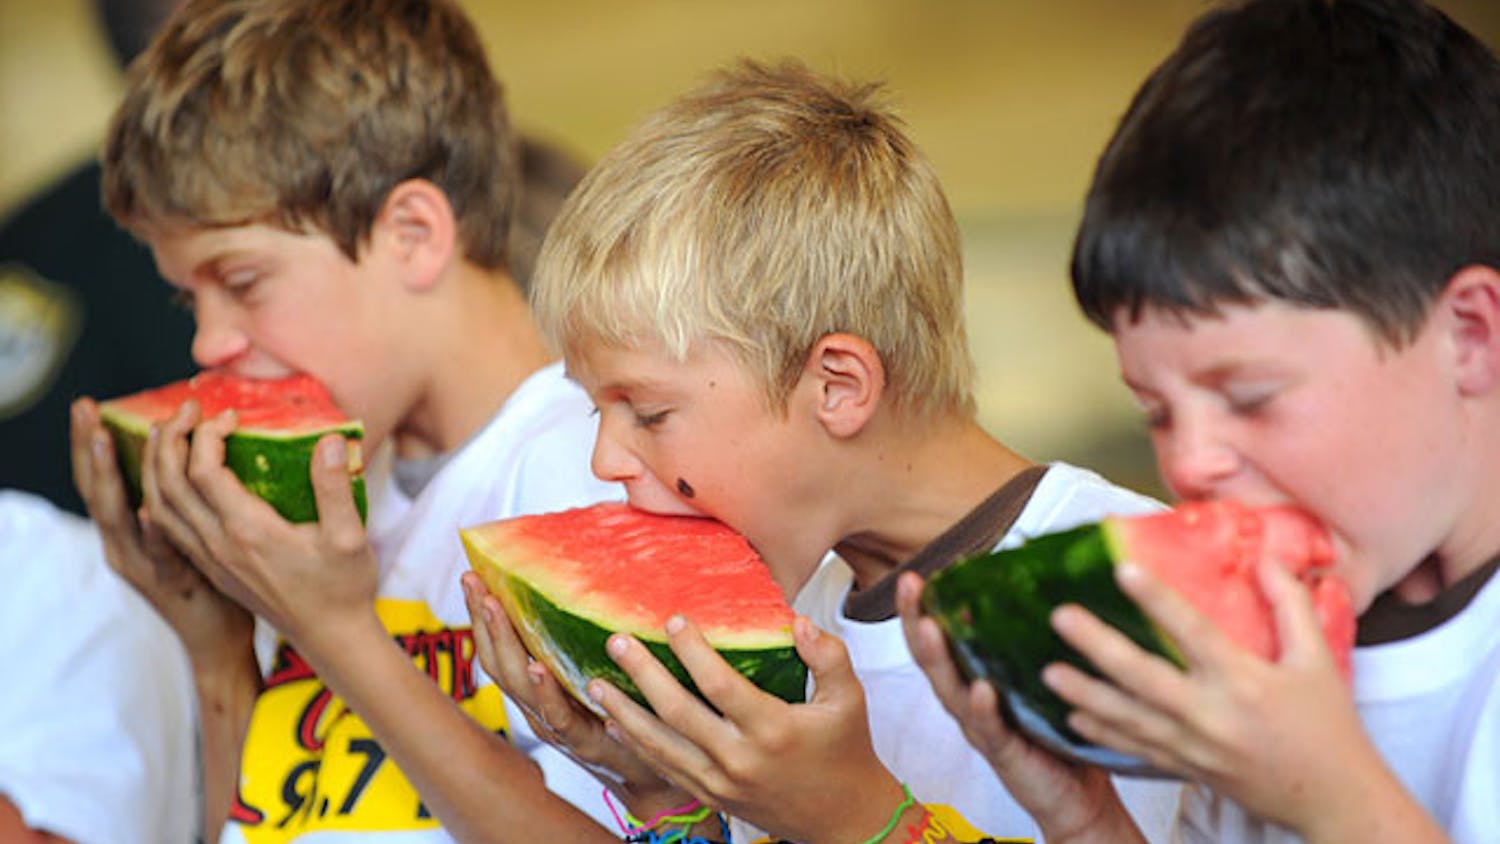 Zion Barber, left, Jacob Musselwhite and Colton Crane, right, sink their teeth into pieces of watermelon during the watermelon-eating contest at the 65th annual Newberry Watermelon Festival at the Canterbury Equestrian Showplace in 2010.